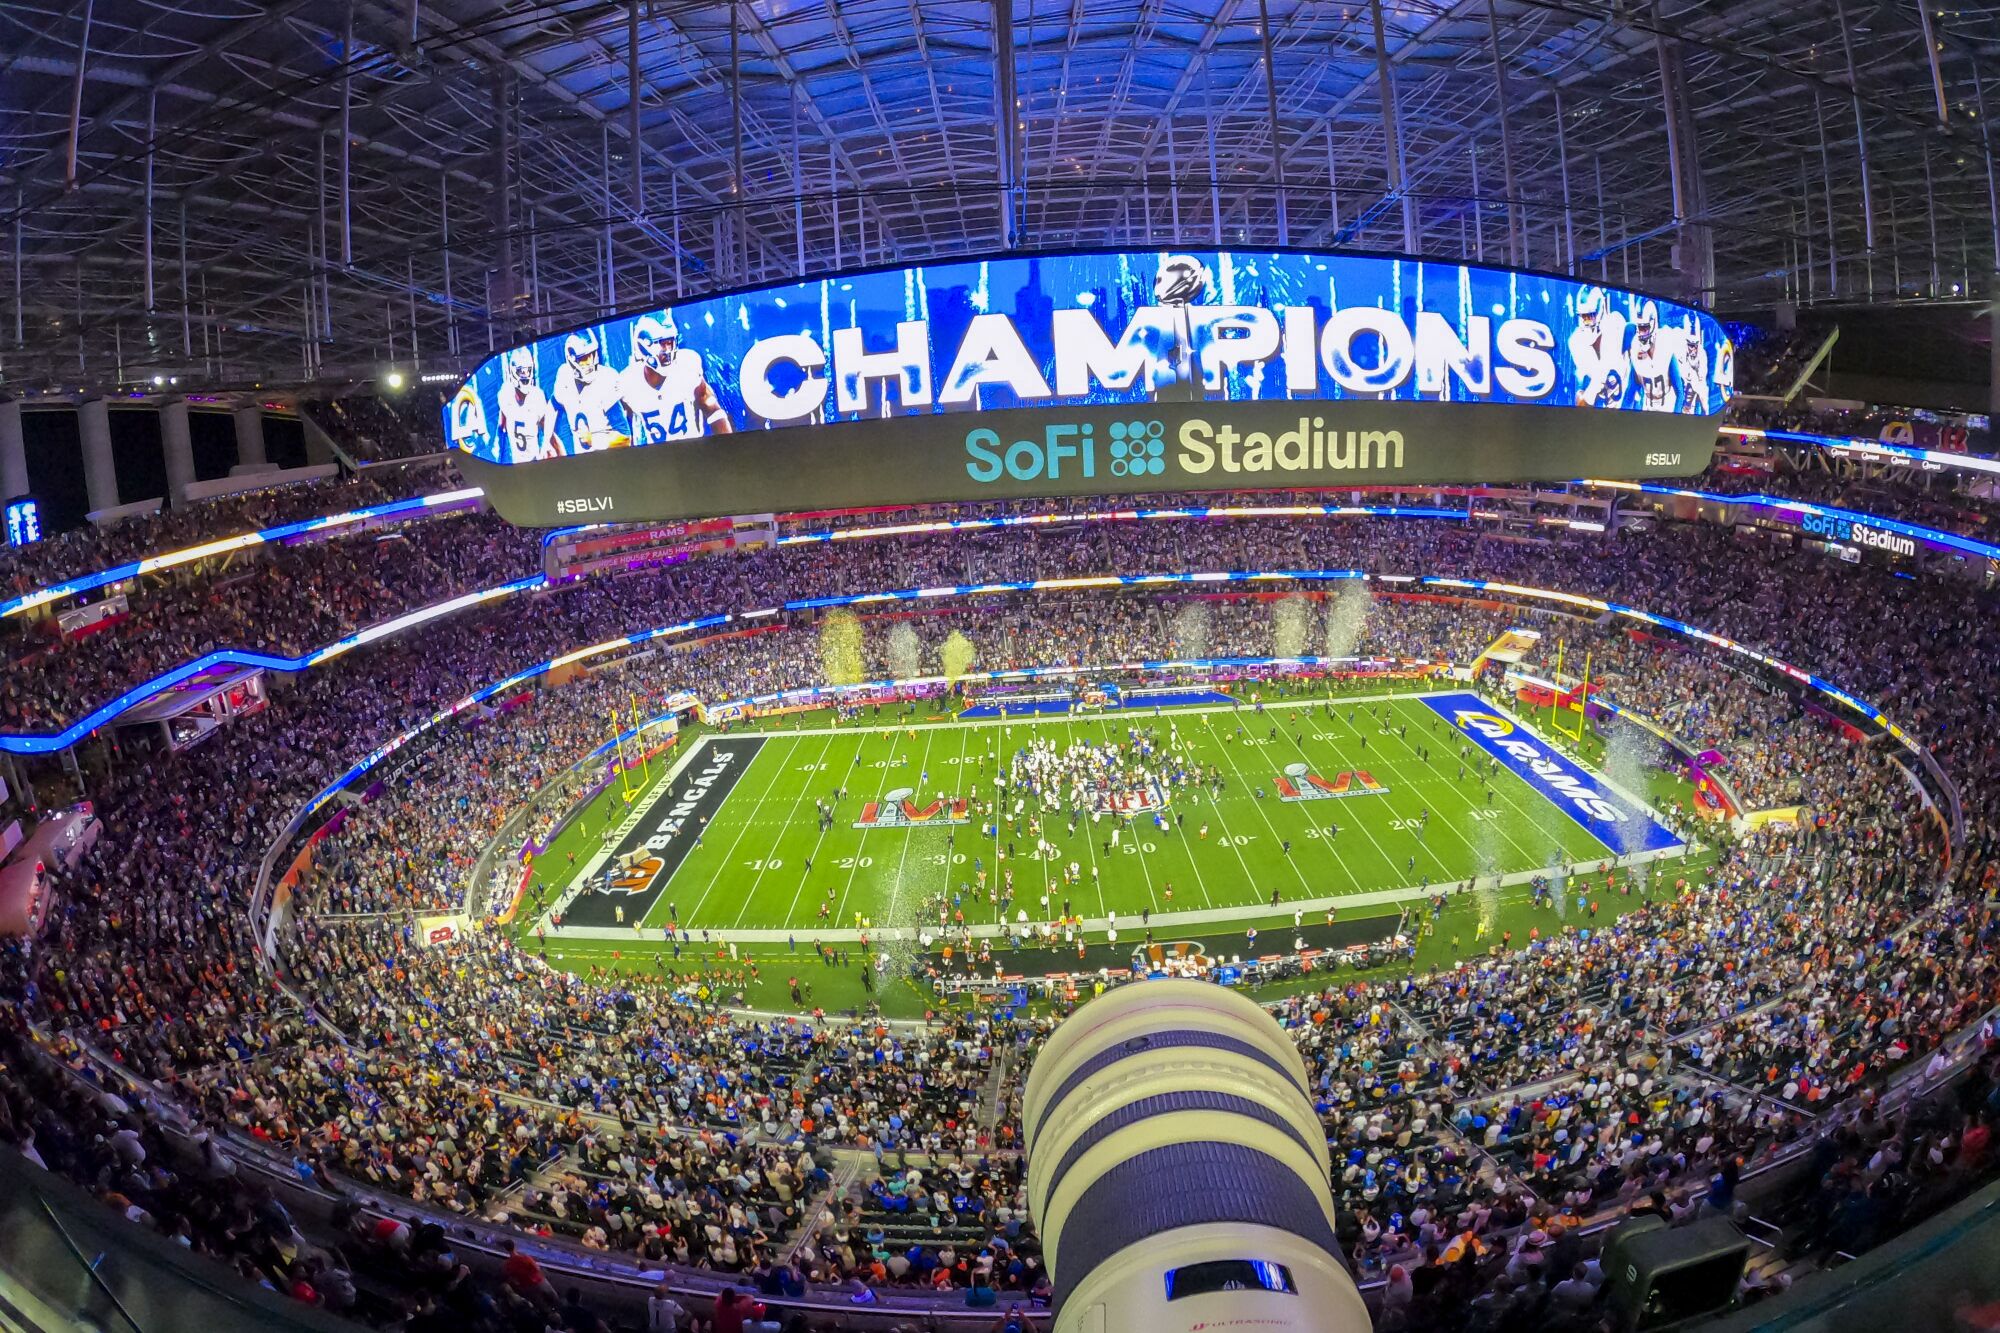 A general view of SoFi Stadium in the final moments of Super Bowl LVI.